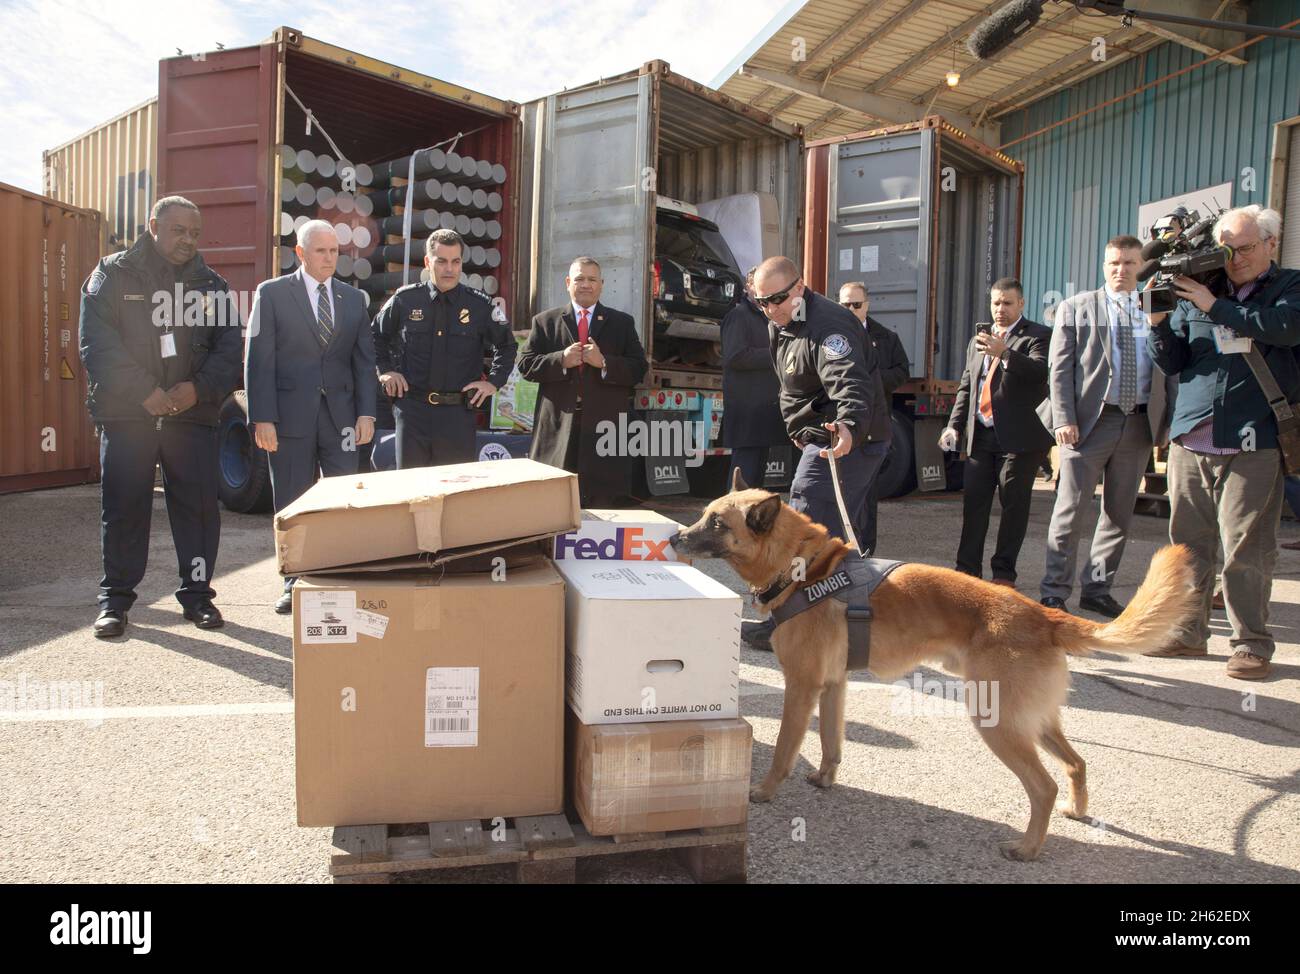 Vice President of the United States Mike Pence is given a demonstration of canine search procedures by U.S. Customs and Border Protection Officer Robert Unitis and his dog 'Zombie,' 7, as he visits U.S. Customs and Border Protection operations at Dundalk Marine Terminal within the Port of Baltimore in Baltimore, Md., February 8, 2019. Stock Photo